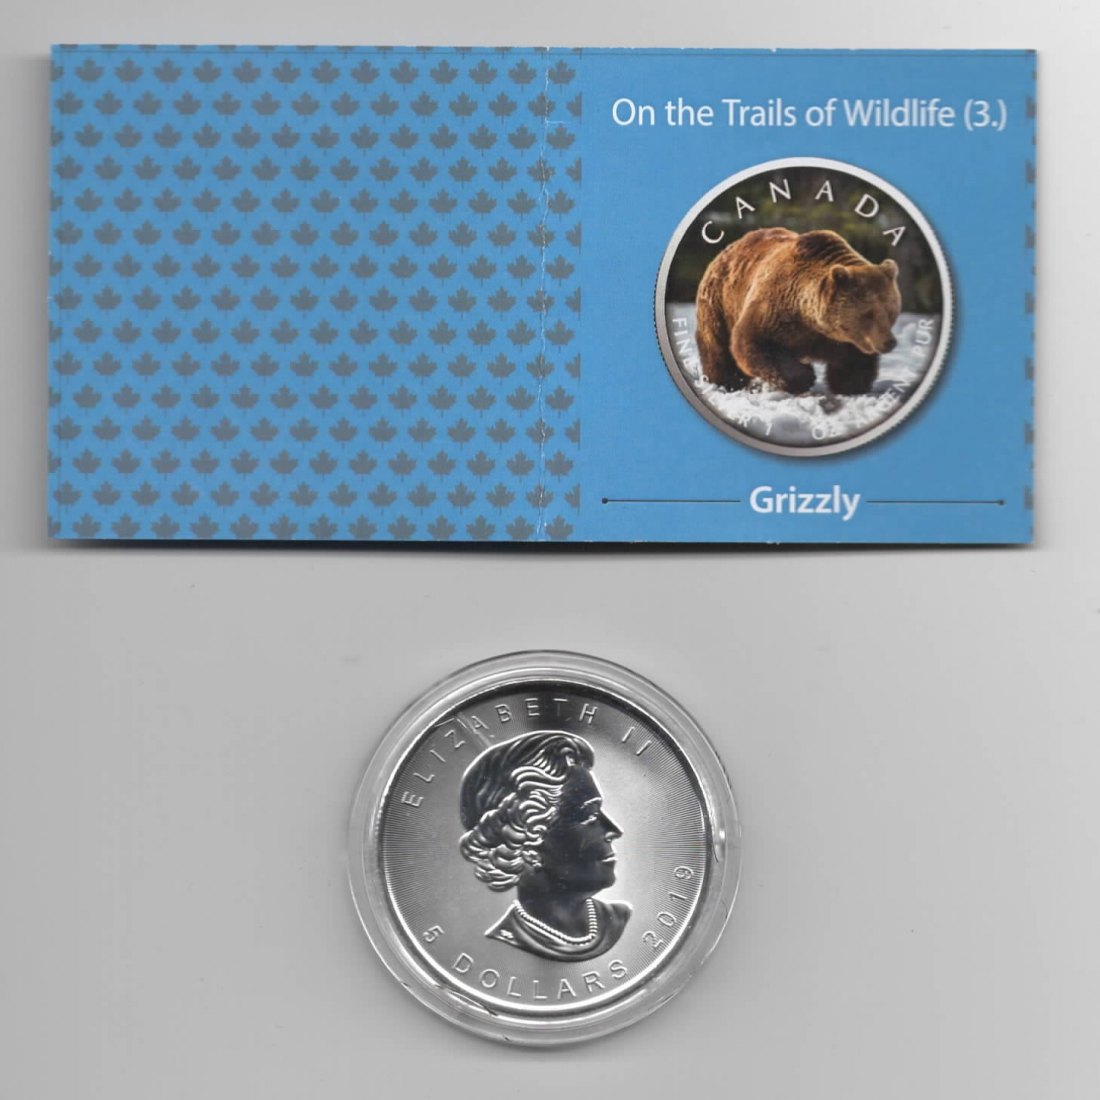  Maple Leaf, On the Trails of Wildlife, 2019, Grizzly, Farbe, 2500, Zertifikat, 1 unze oz Silber   